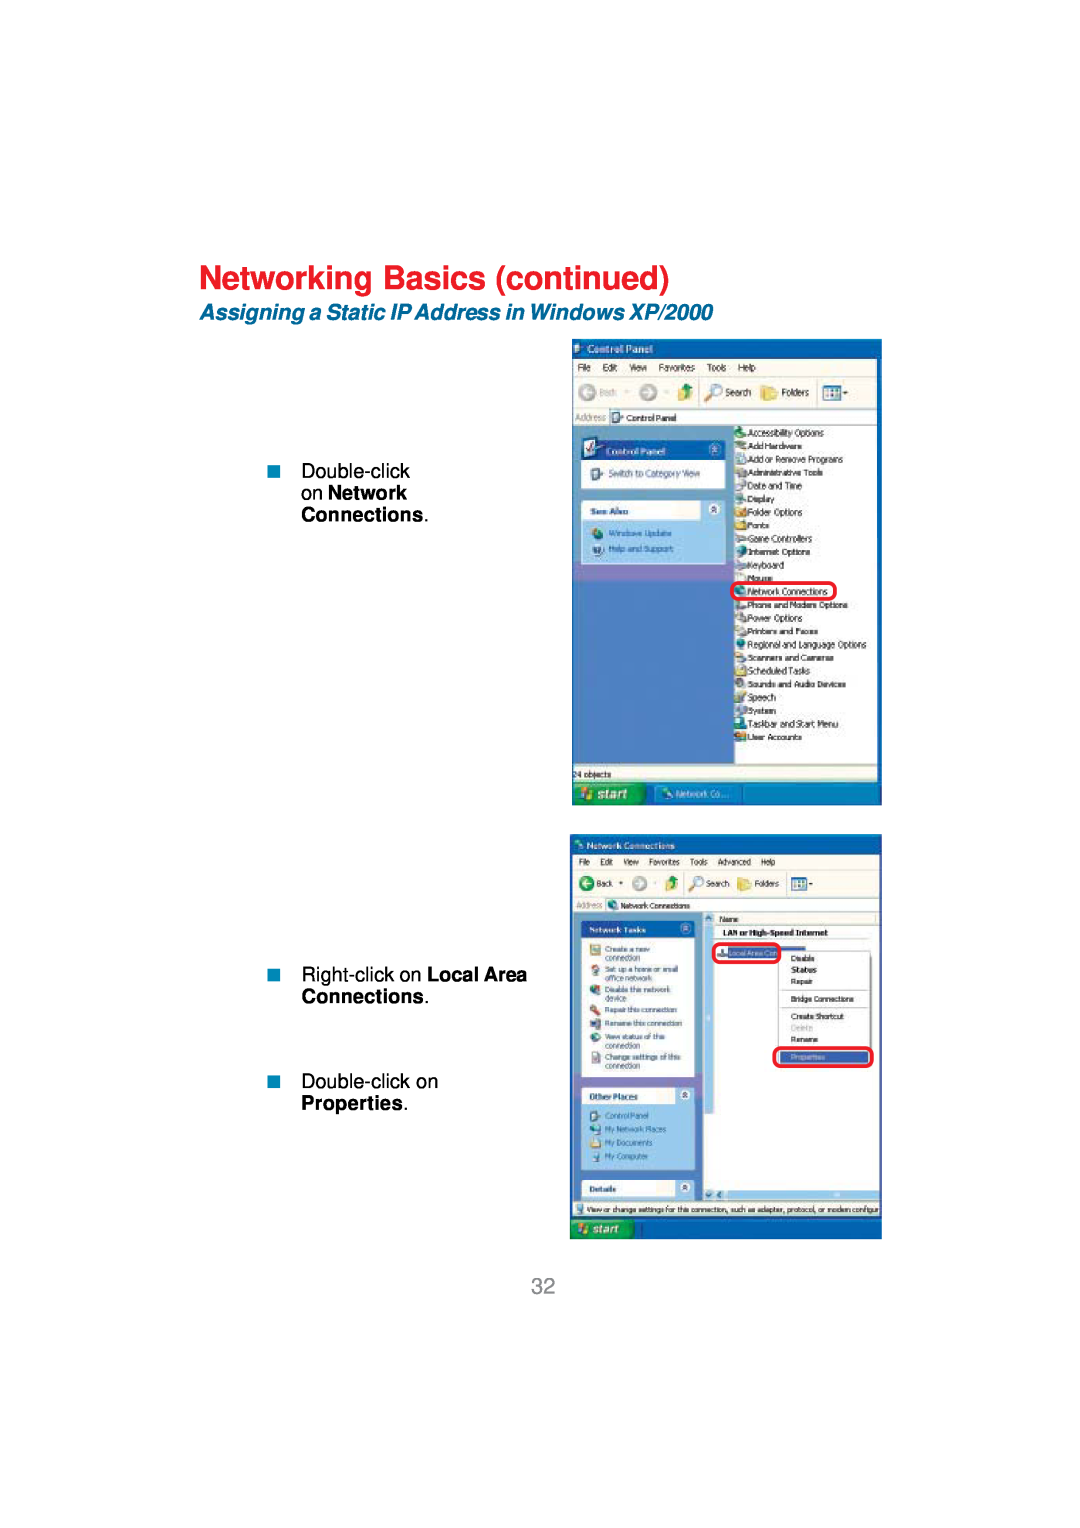 D-Link DWL-AG530 manual Networking Basics continued, Assigning a Static IP Address in Windows XP/2000 